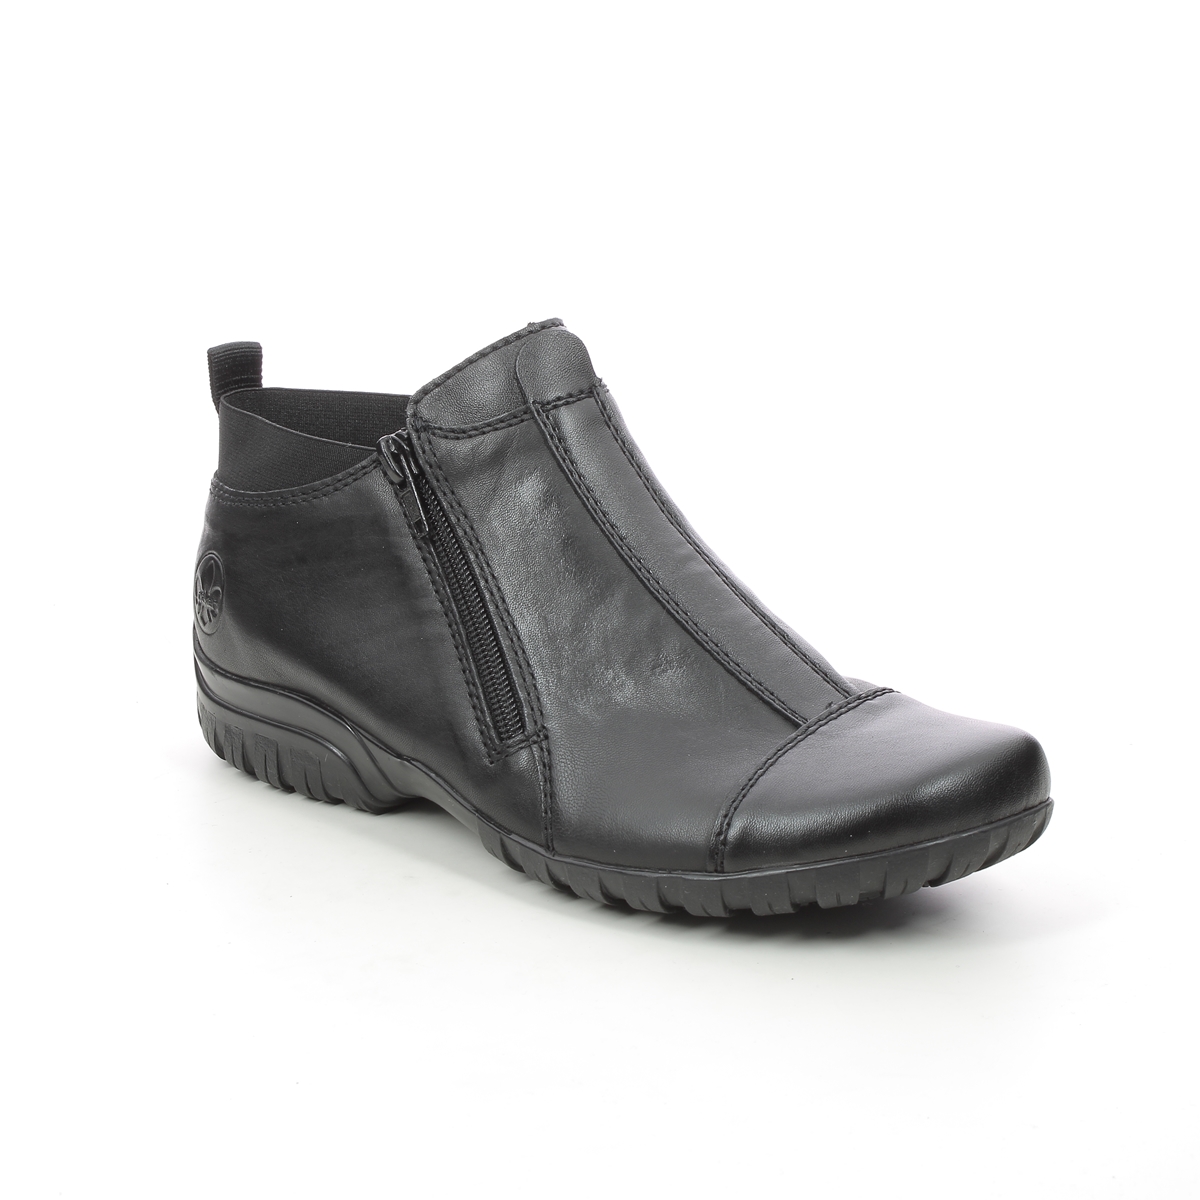 Rieker Birbocap 15 Black Leather Womens Ankle Boots L4653-00 In Size 37 In Plain Black Leather